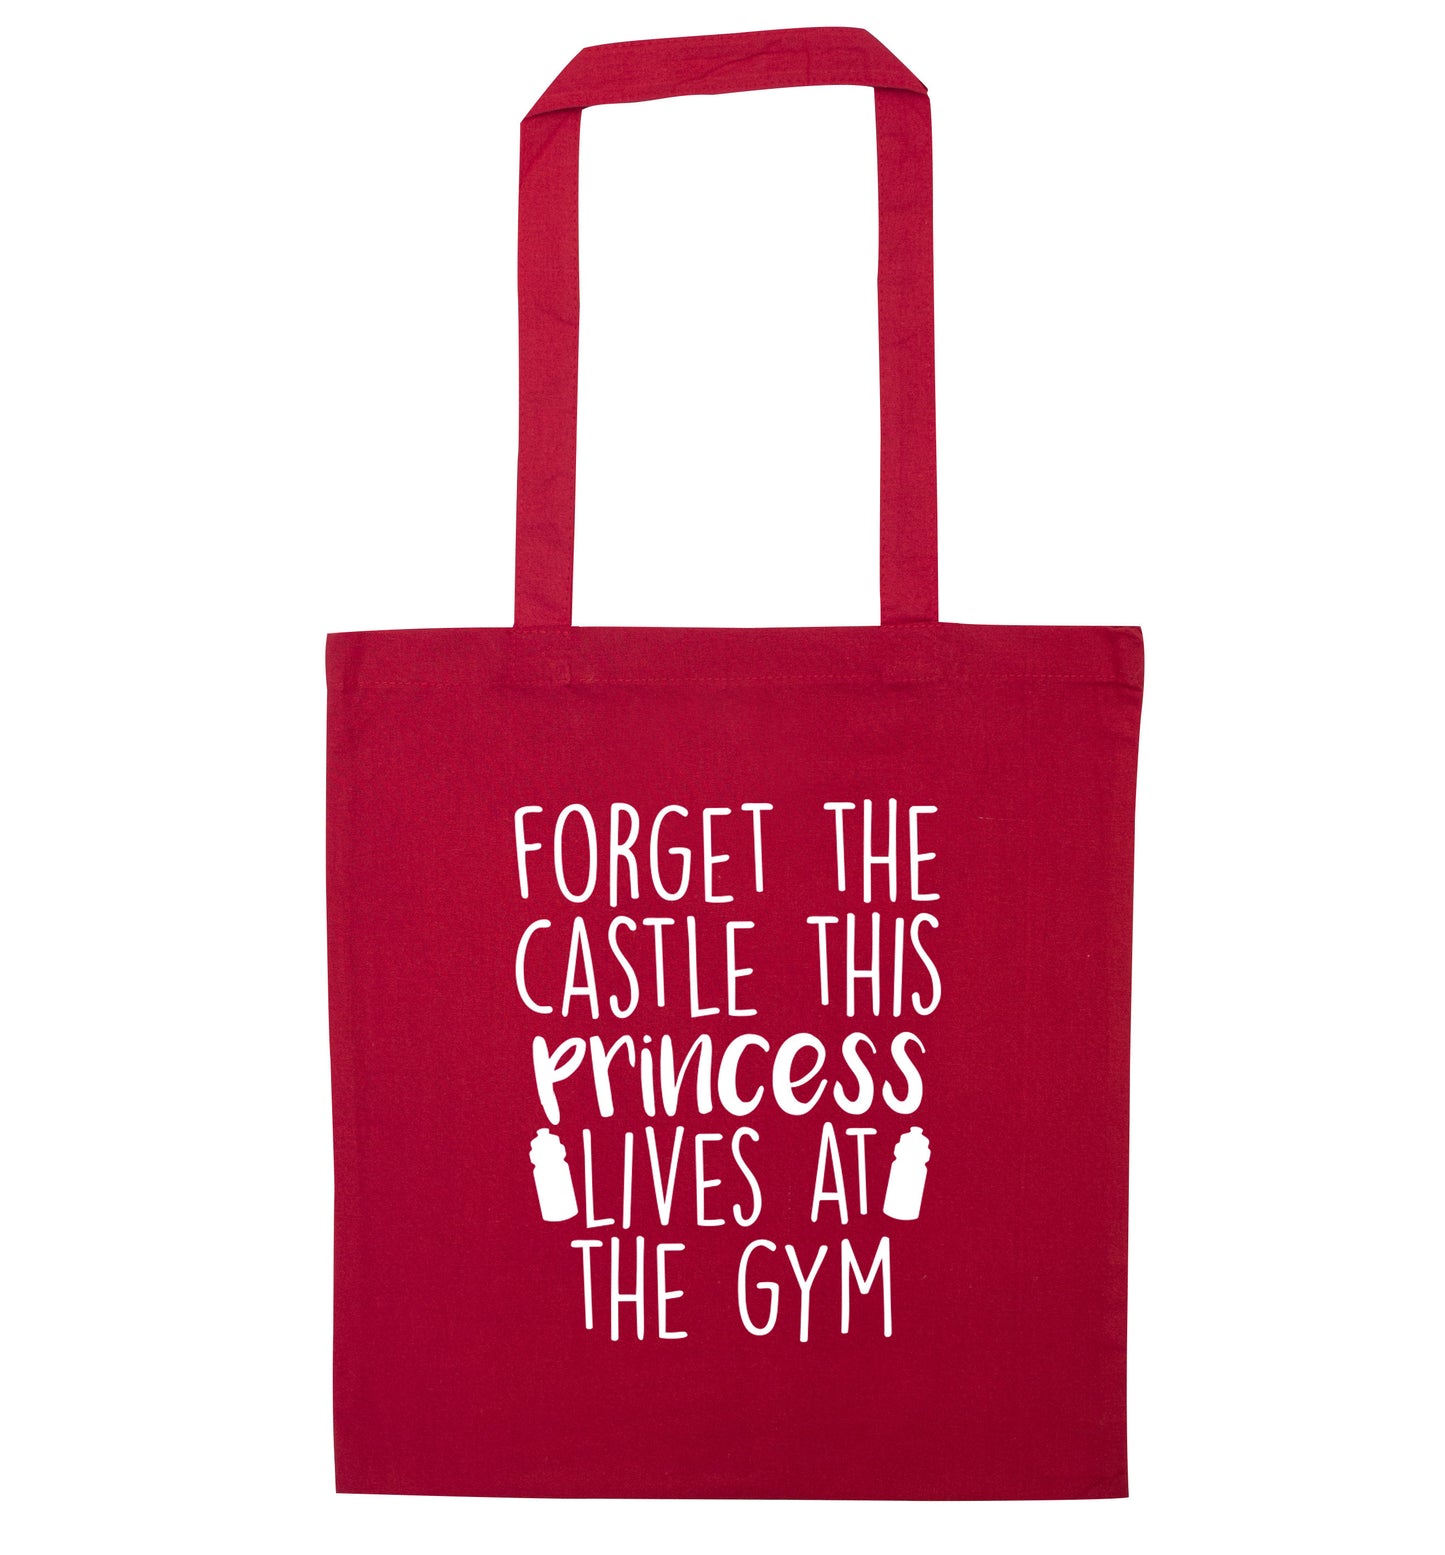 Forget the castle this princess lives at the gym red tote bag